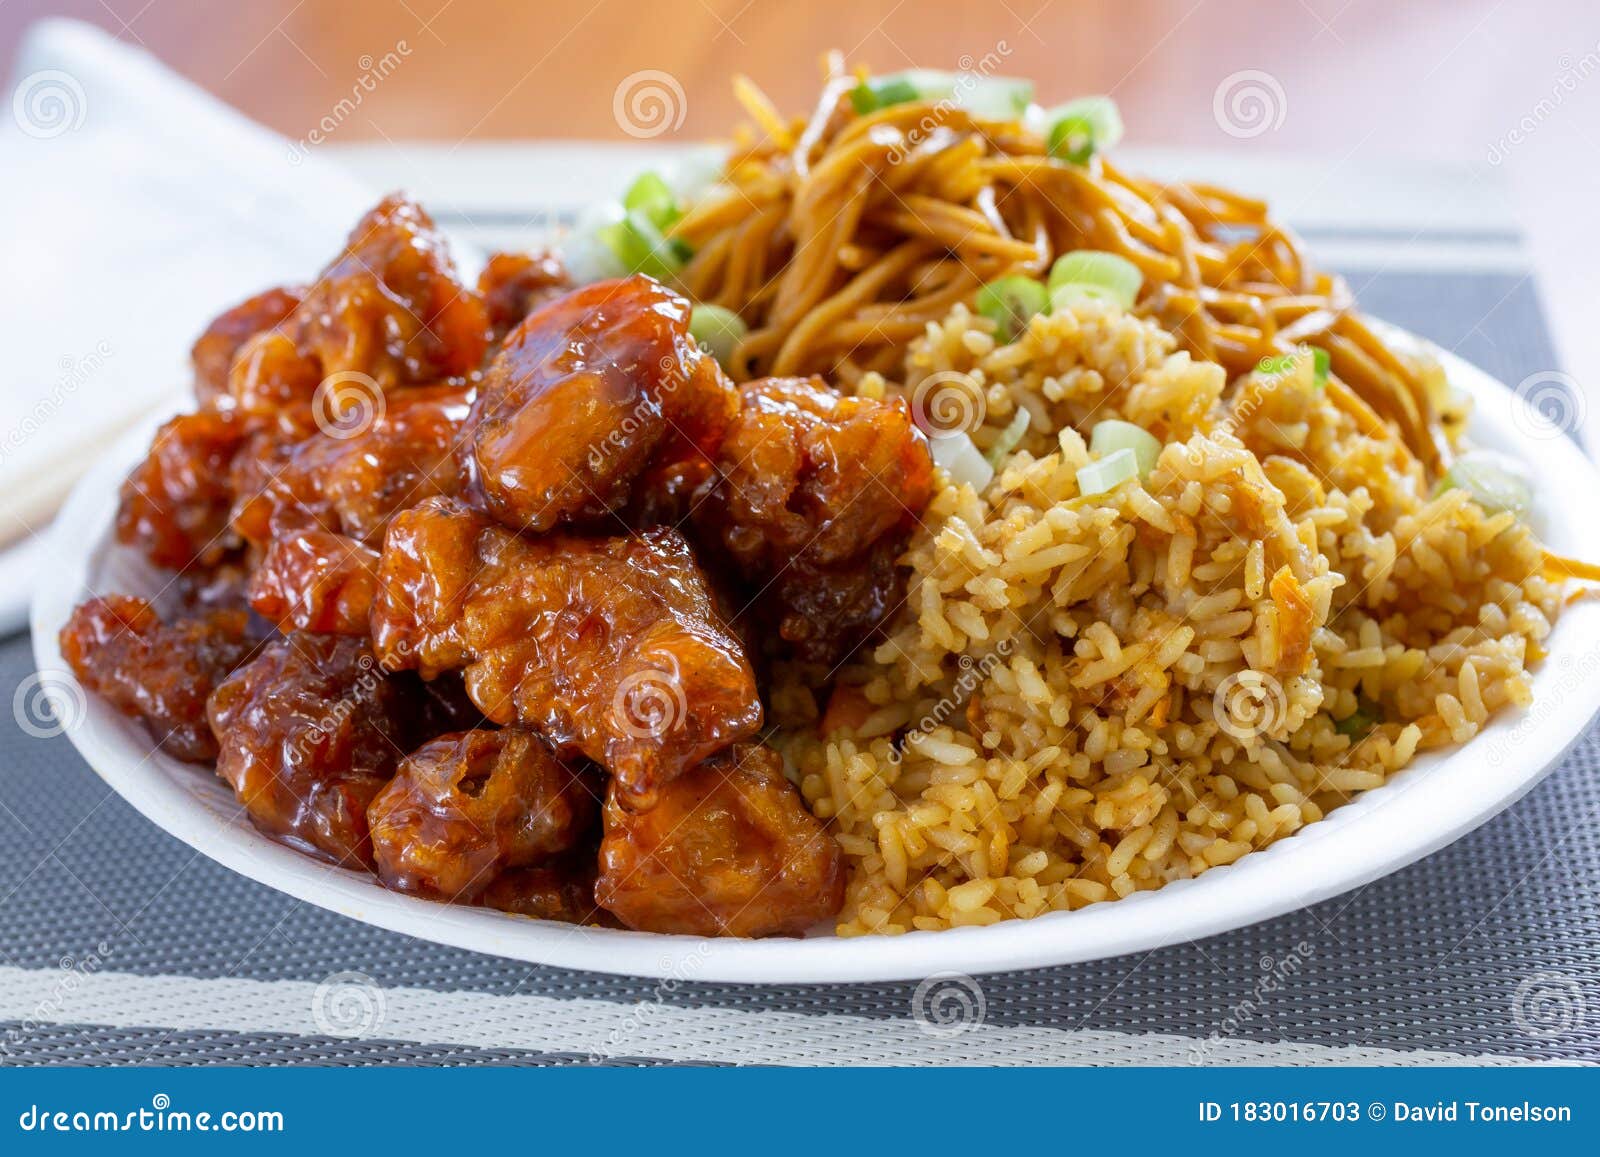 chinese-fast-food-combo-view-plate-restaurant-featuring-orange-chicken-chow-mein-fried-rice-183016703.jpg